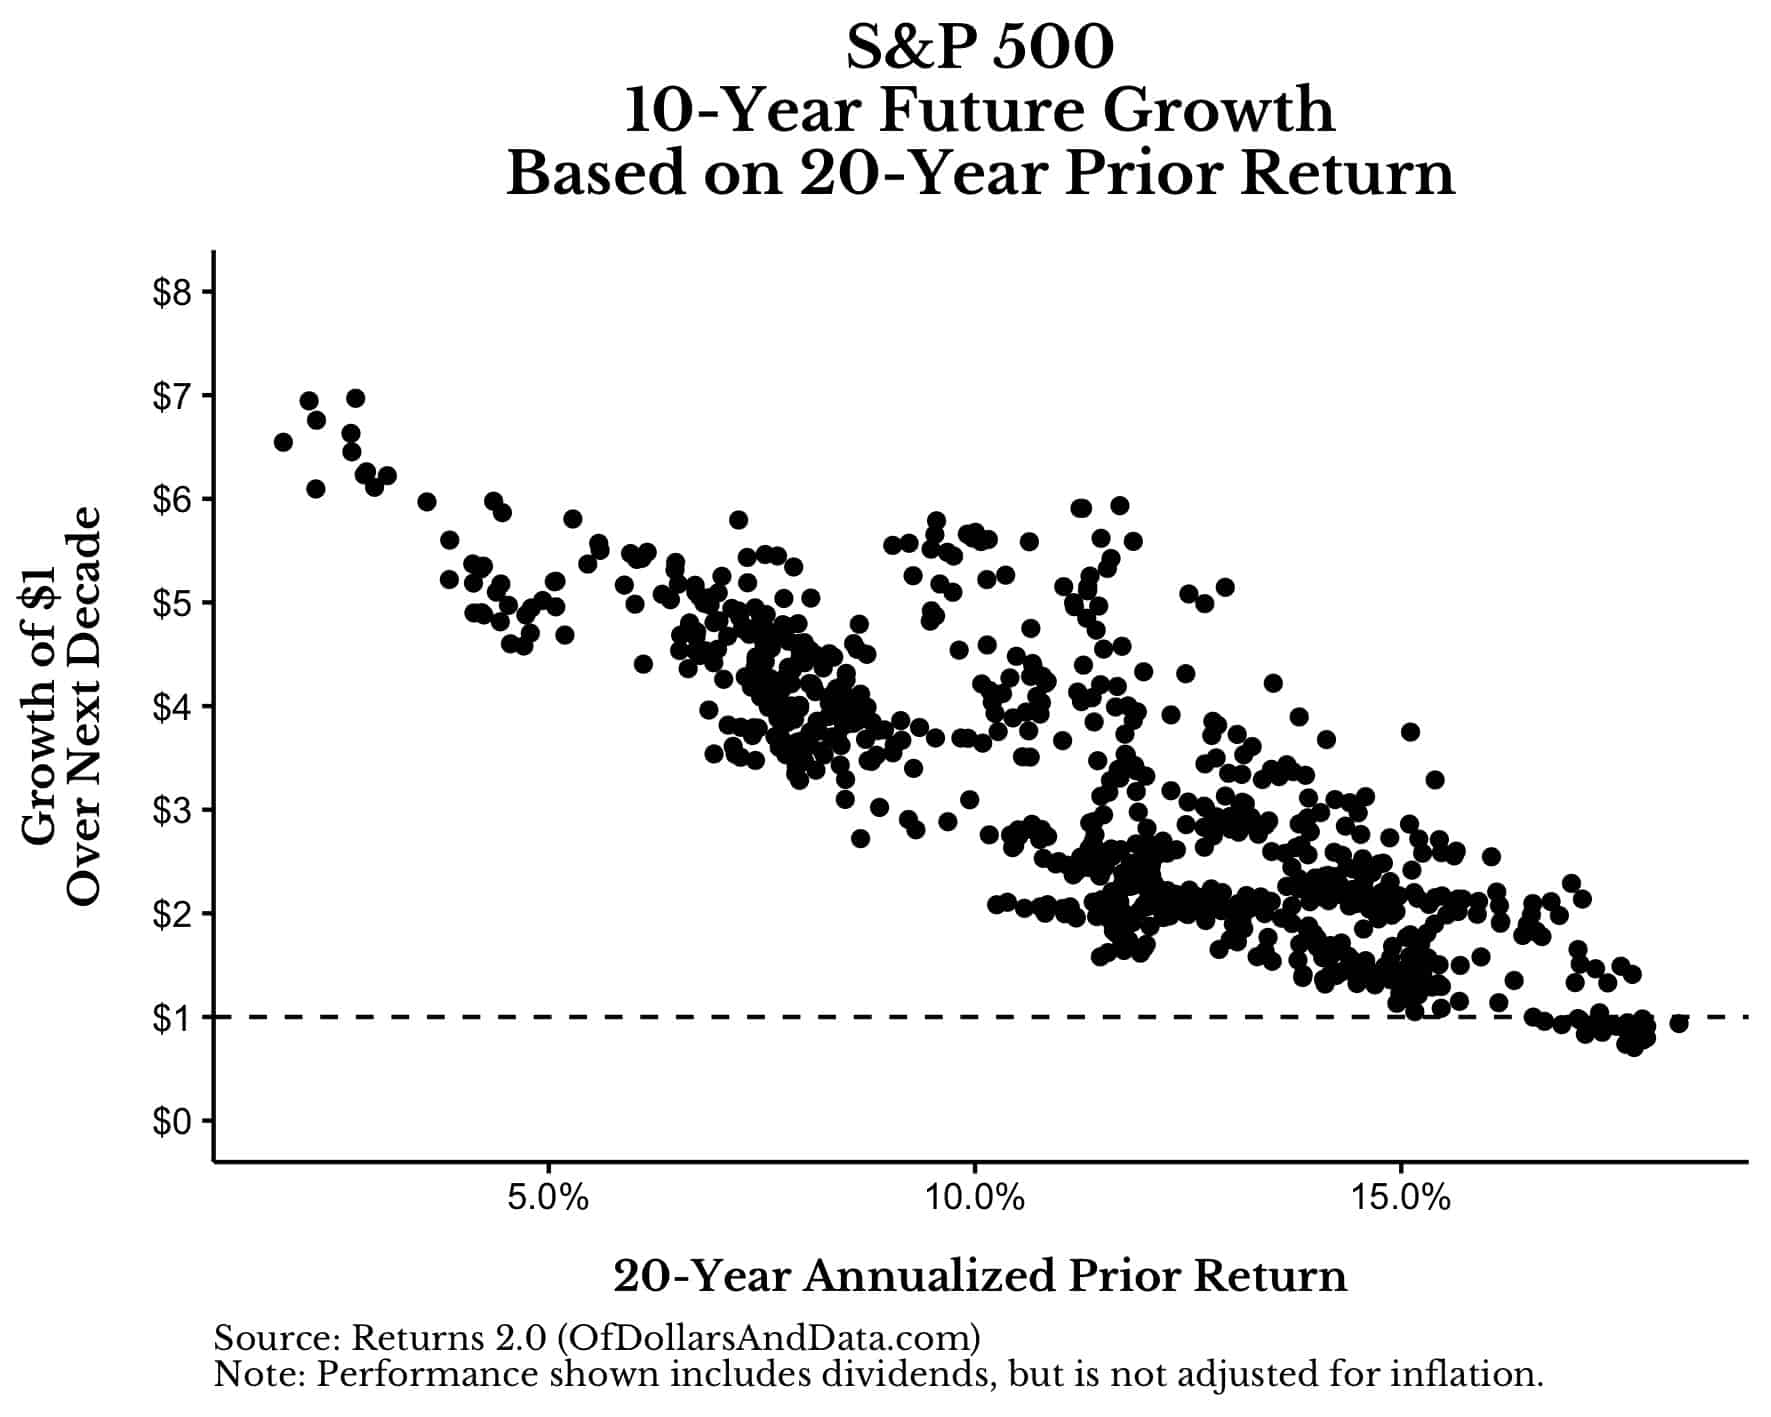 Chart of S&P 500 10-year future growth based on 20-year prior return.